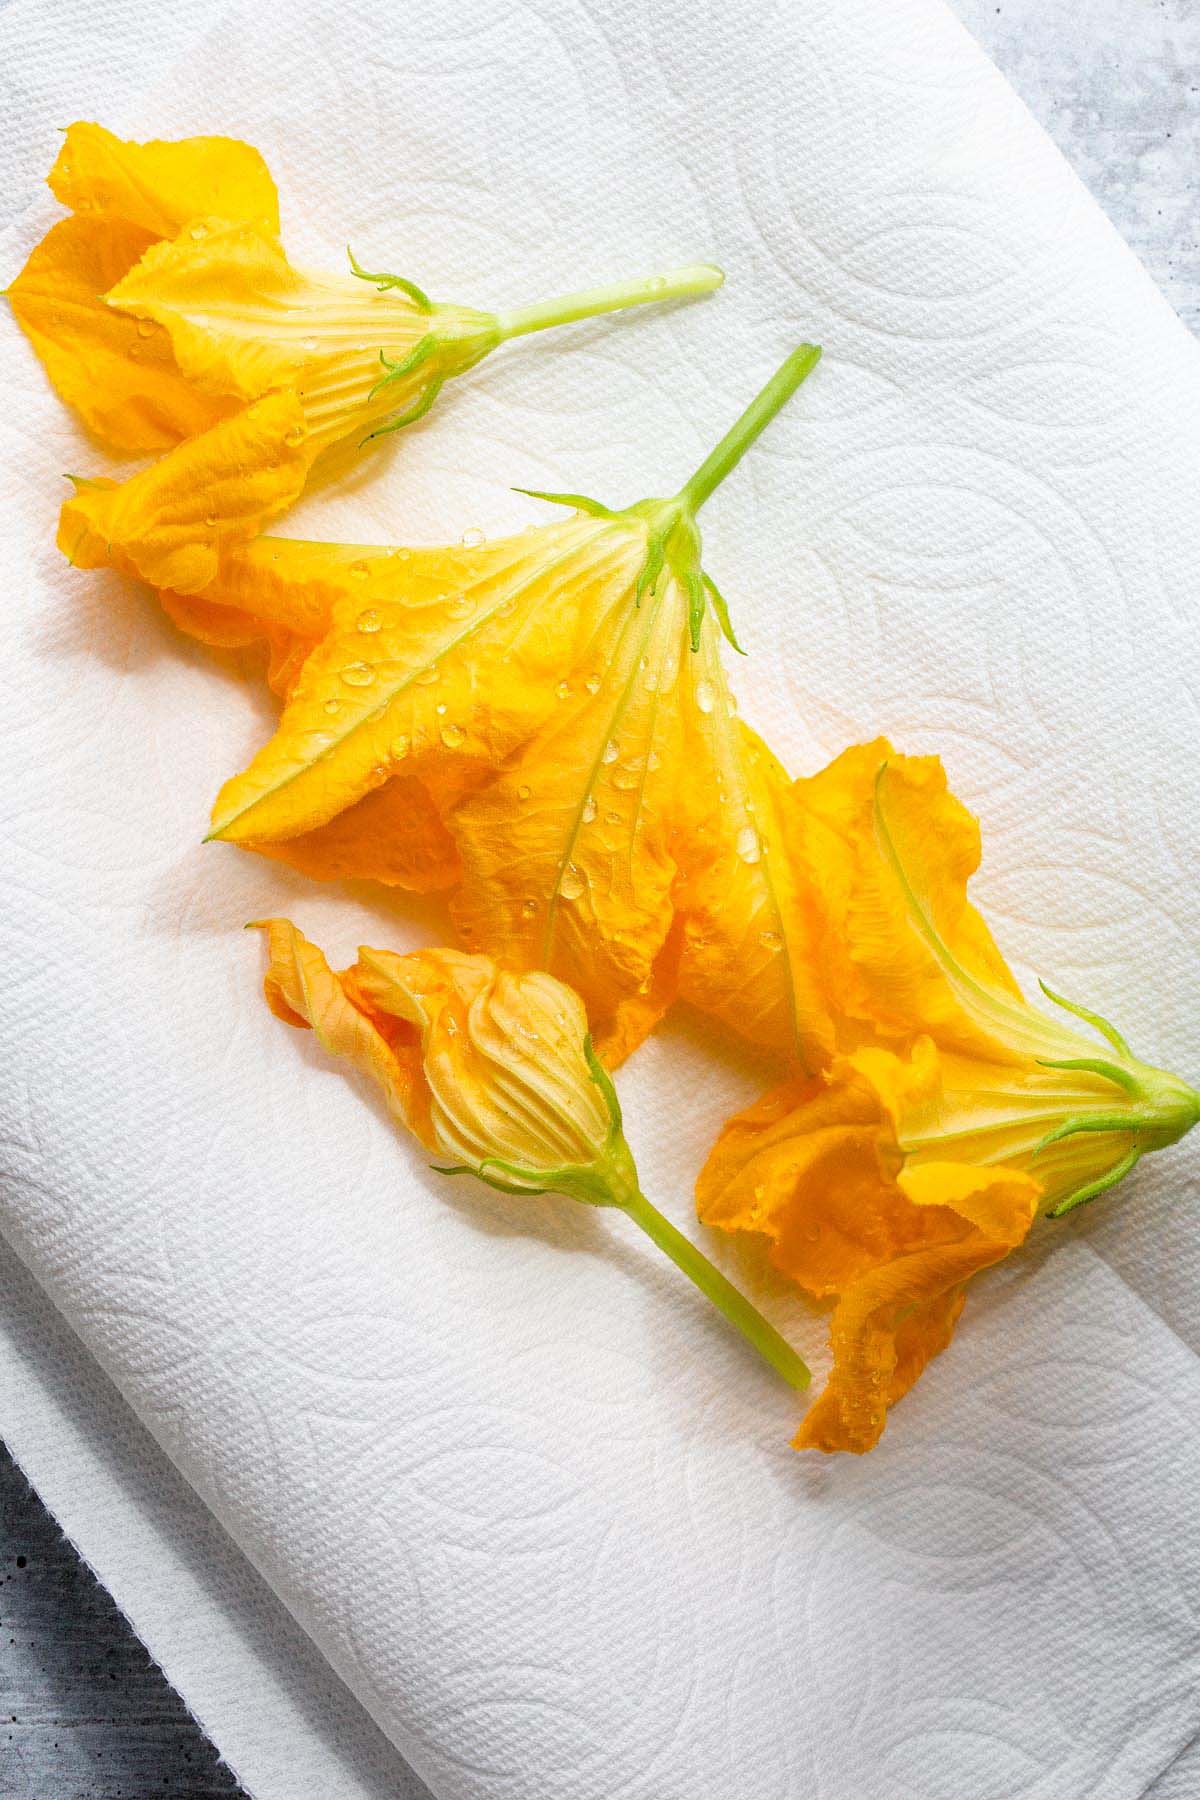 Zucchini flowers on a paper towel.